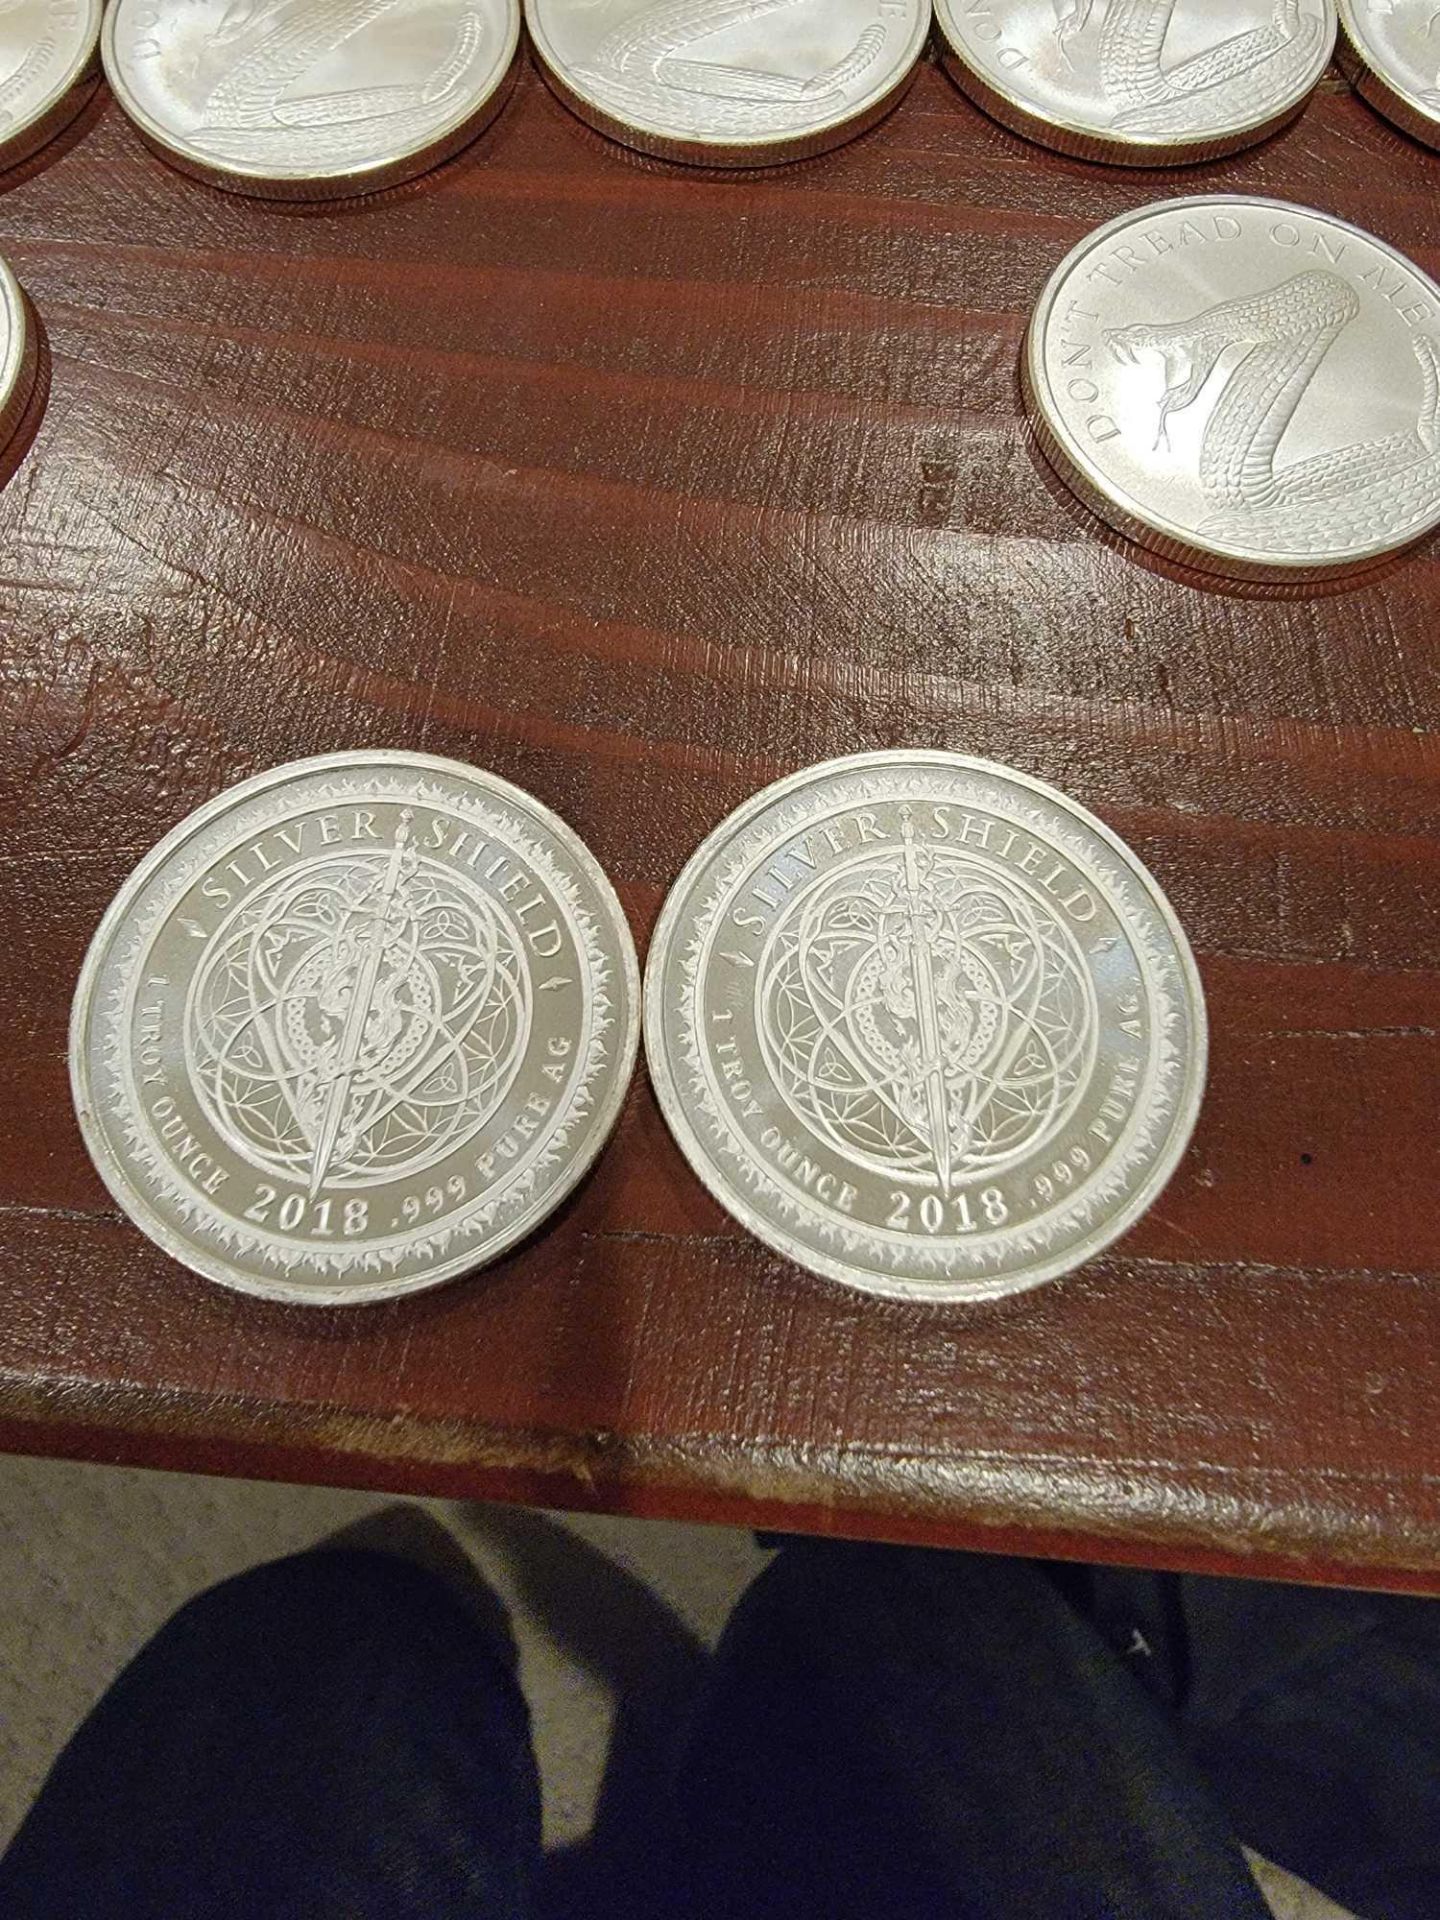 20 oz silver coins - Image 5 of 5